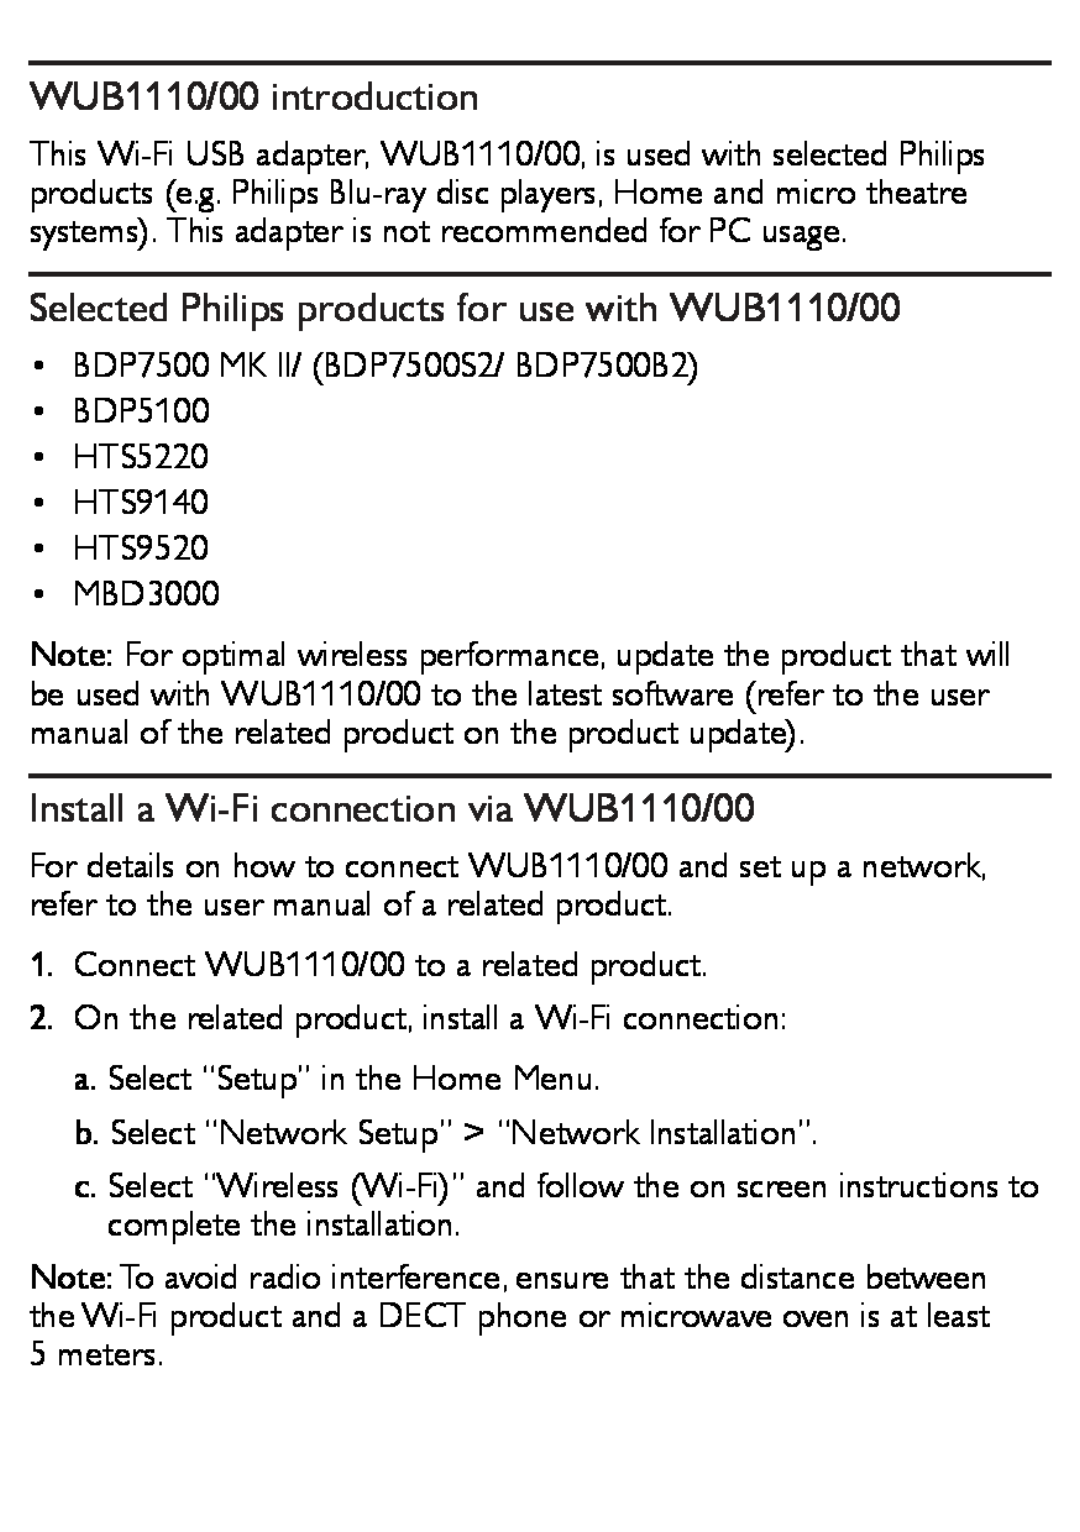 Philips user manual WUB1110/00 introduction, Selected Philips products for use with WUB1110/00 